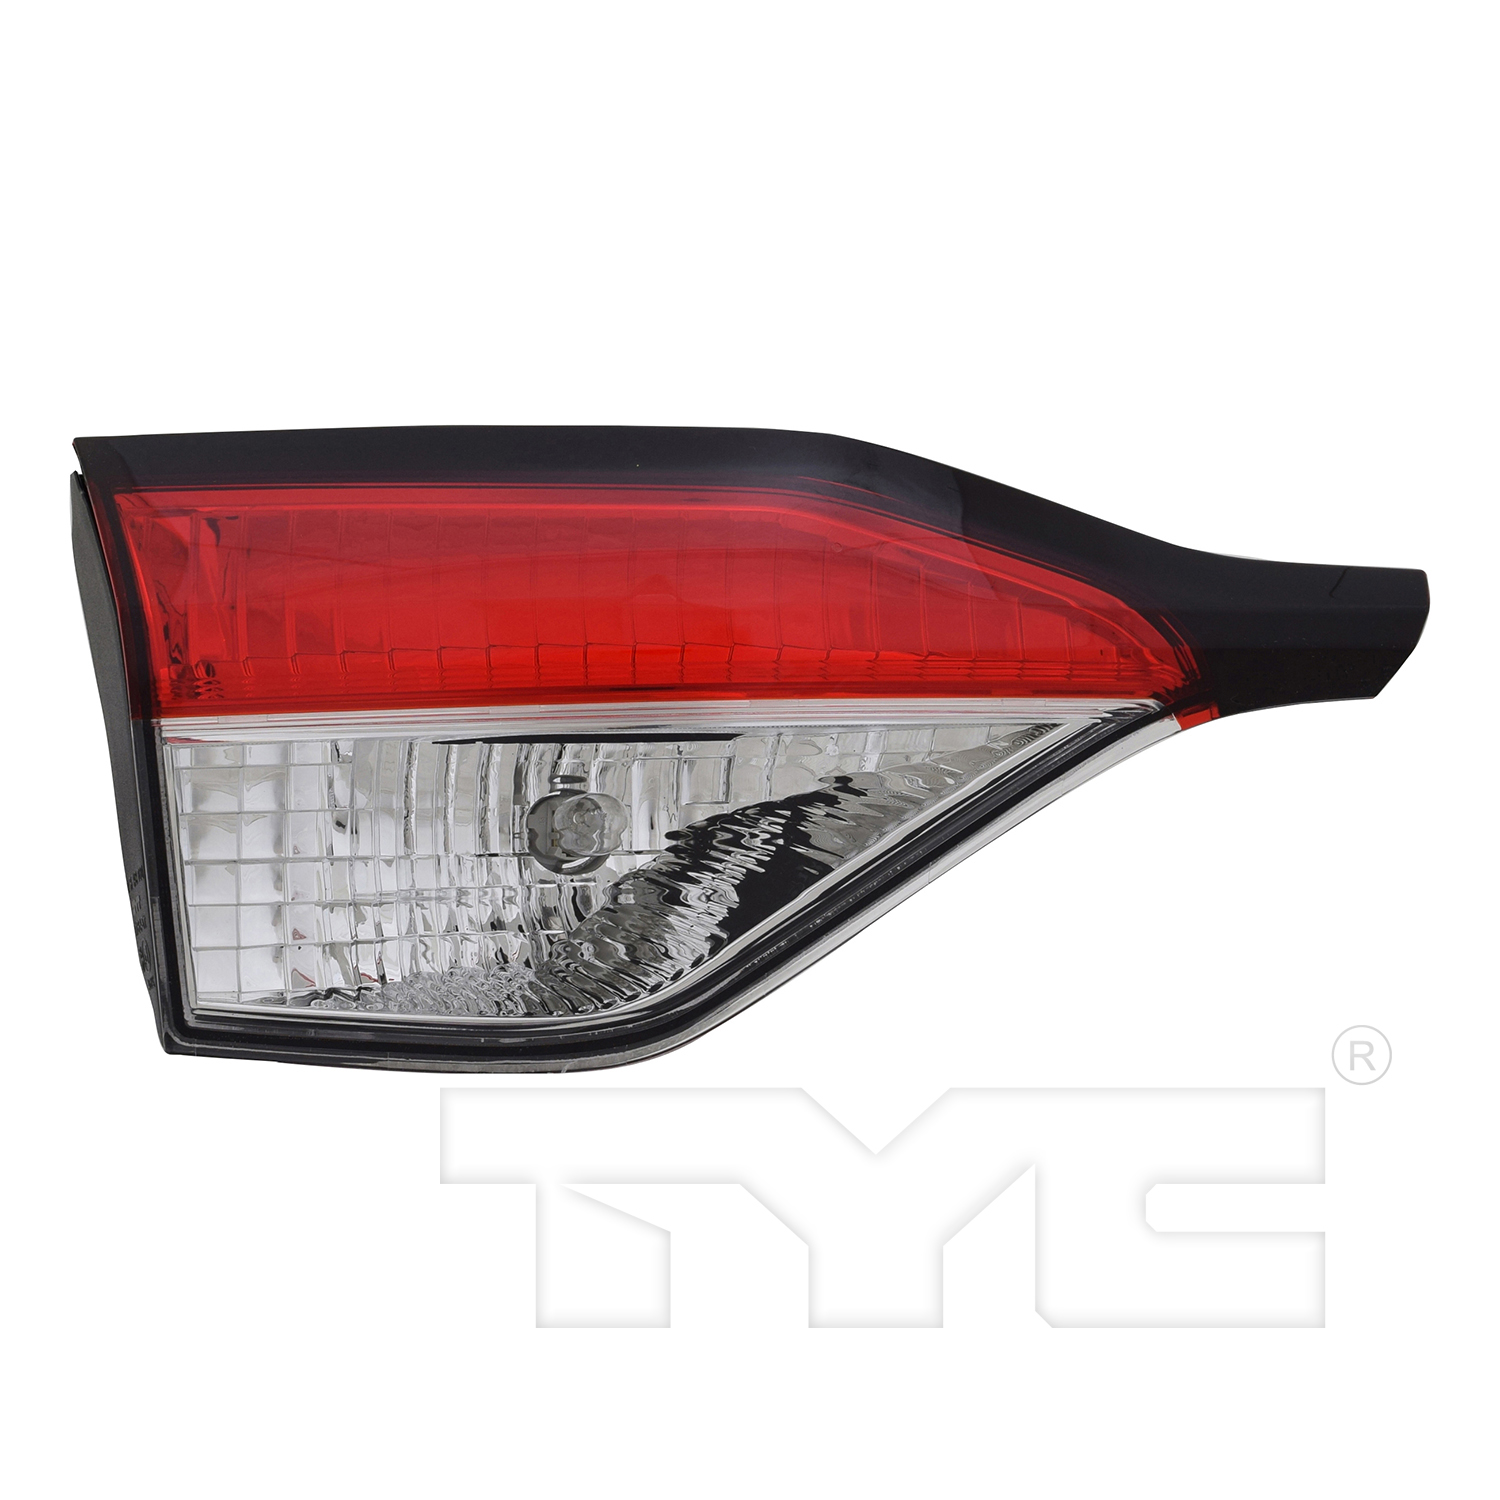 Aftermarket TAILLIGHTS for TOYOTA - COROLLA, COROLLA,20-22,LT Taillamp assy inner